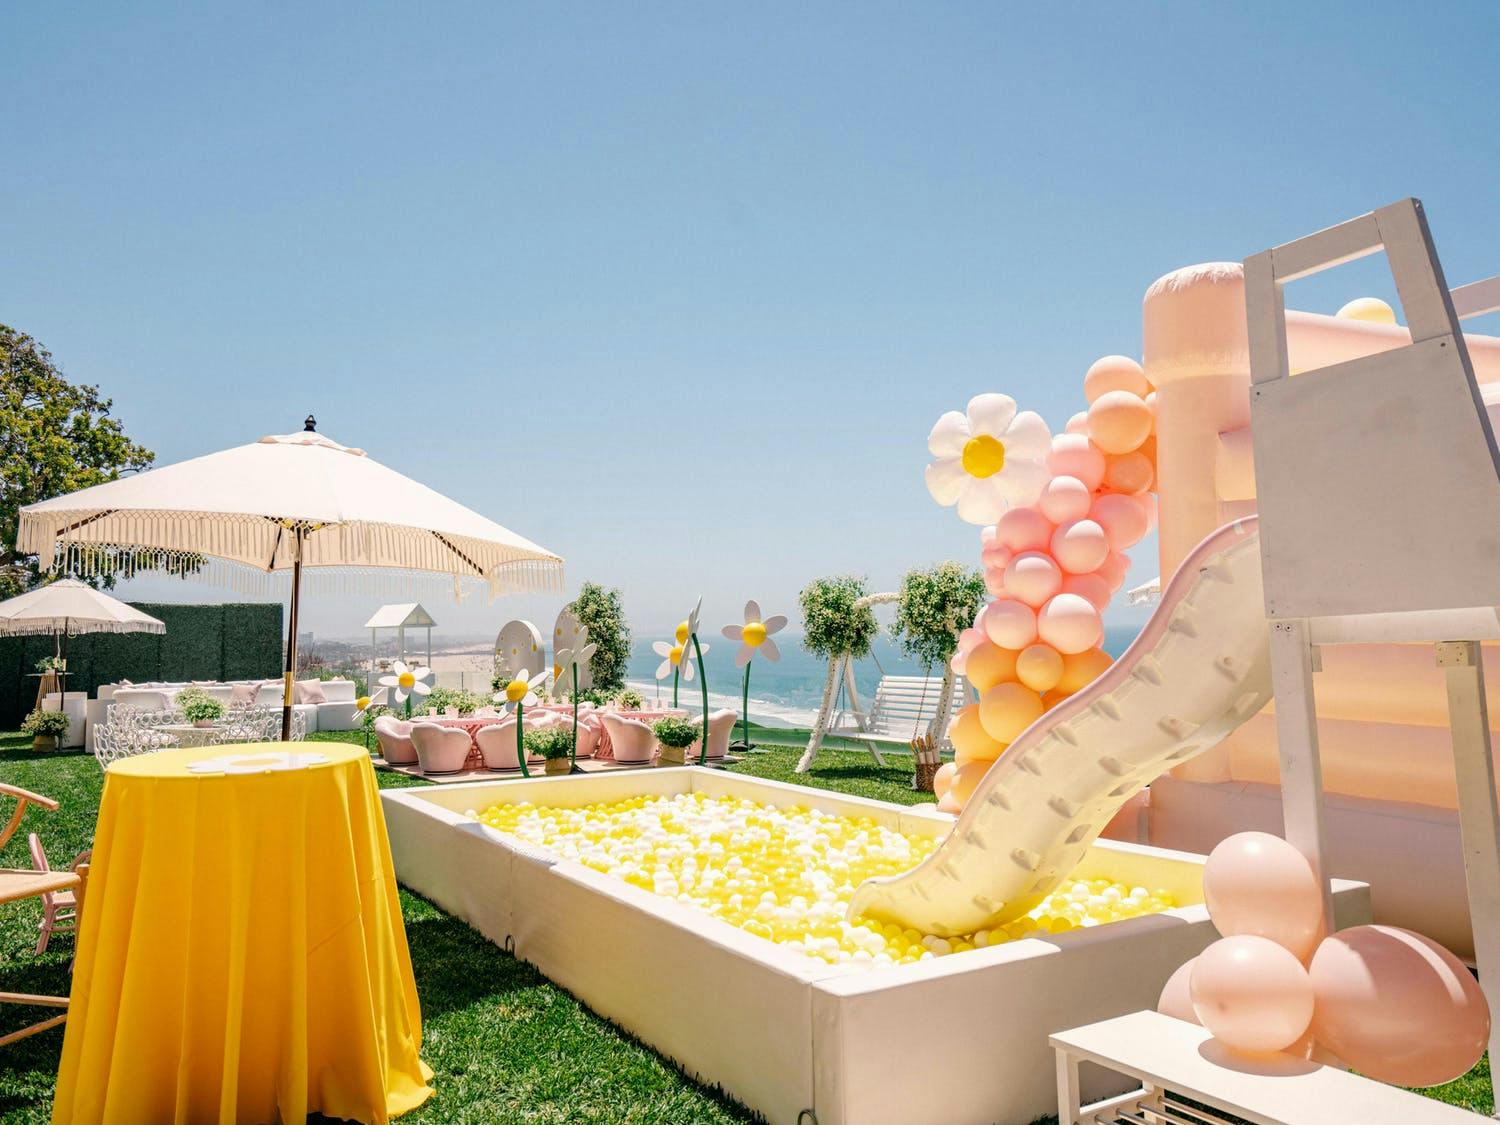 Daisy-themed outdoor kid's birthday party with a slide and yellow ball pit | PartySlate